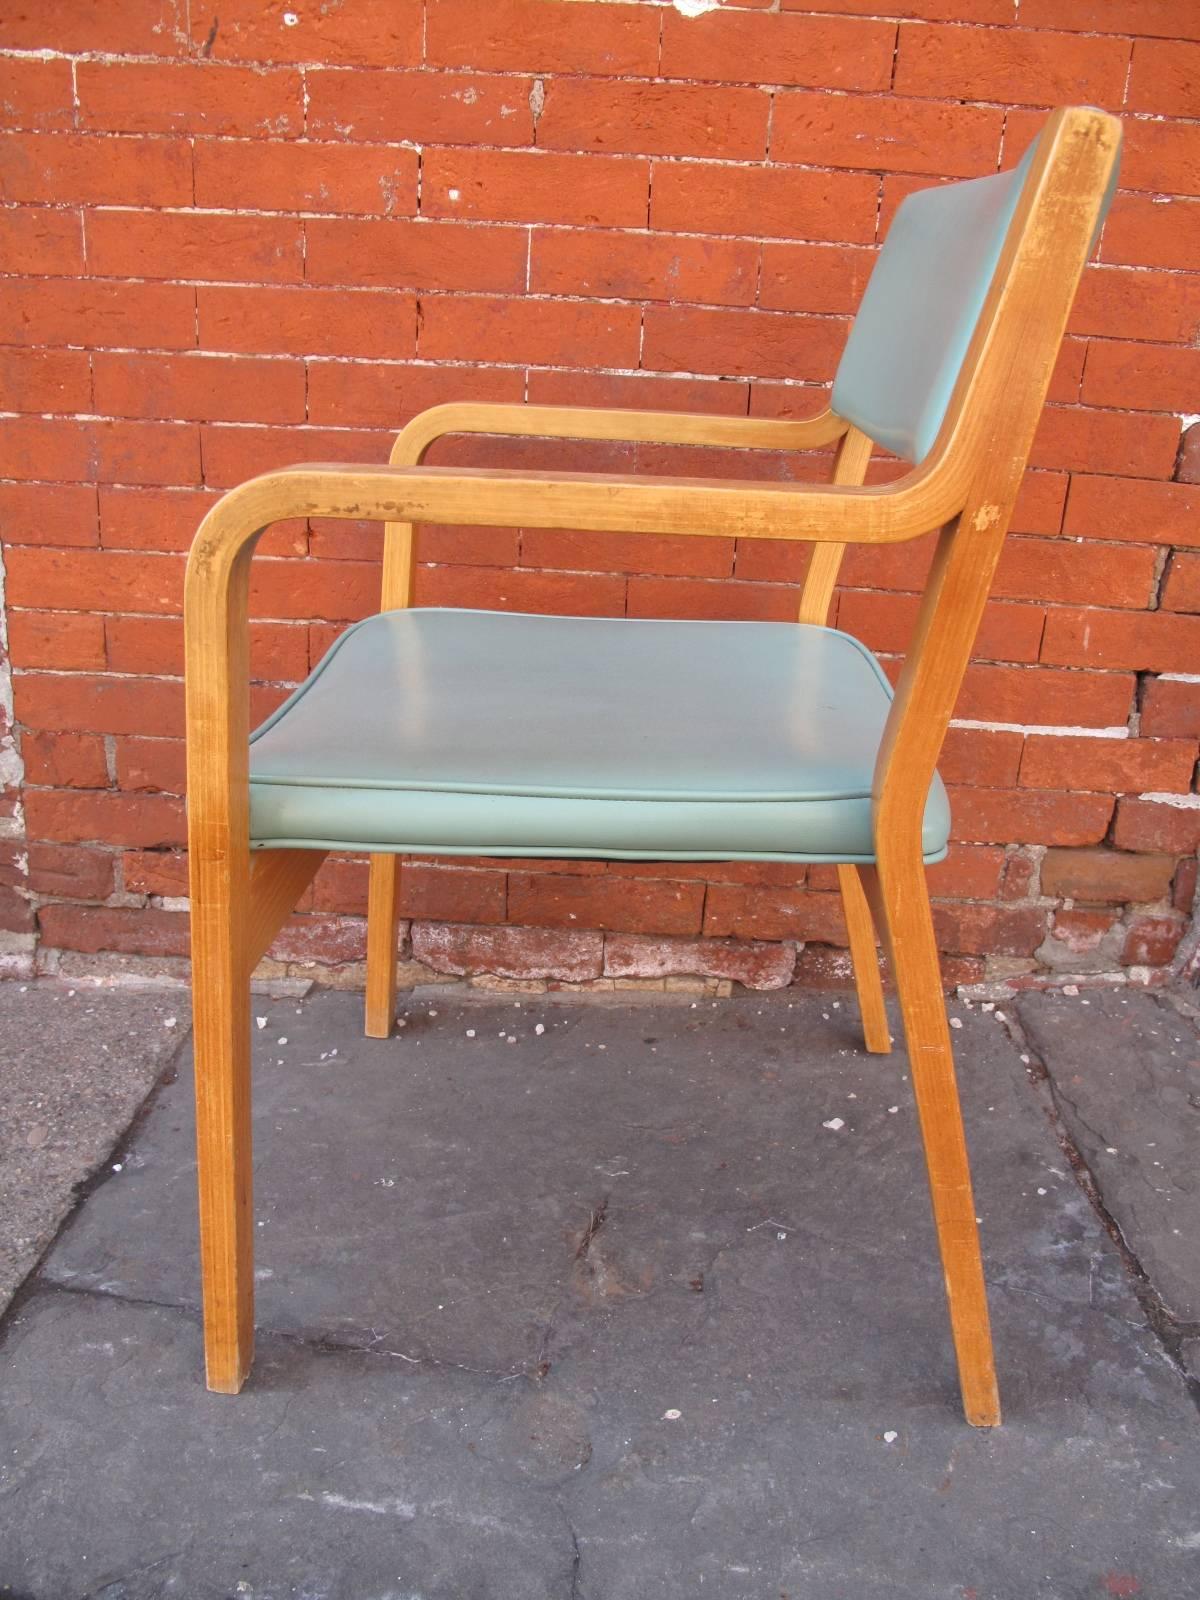 Mid-Century Modern oak and turquoise vinyl armchairs. Manufactured by Thonet in the mid-20th century. Available individually. Total of 11 chairs.